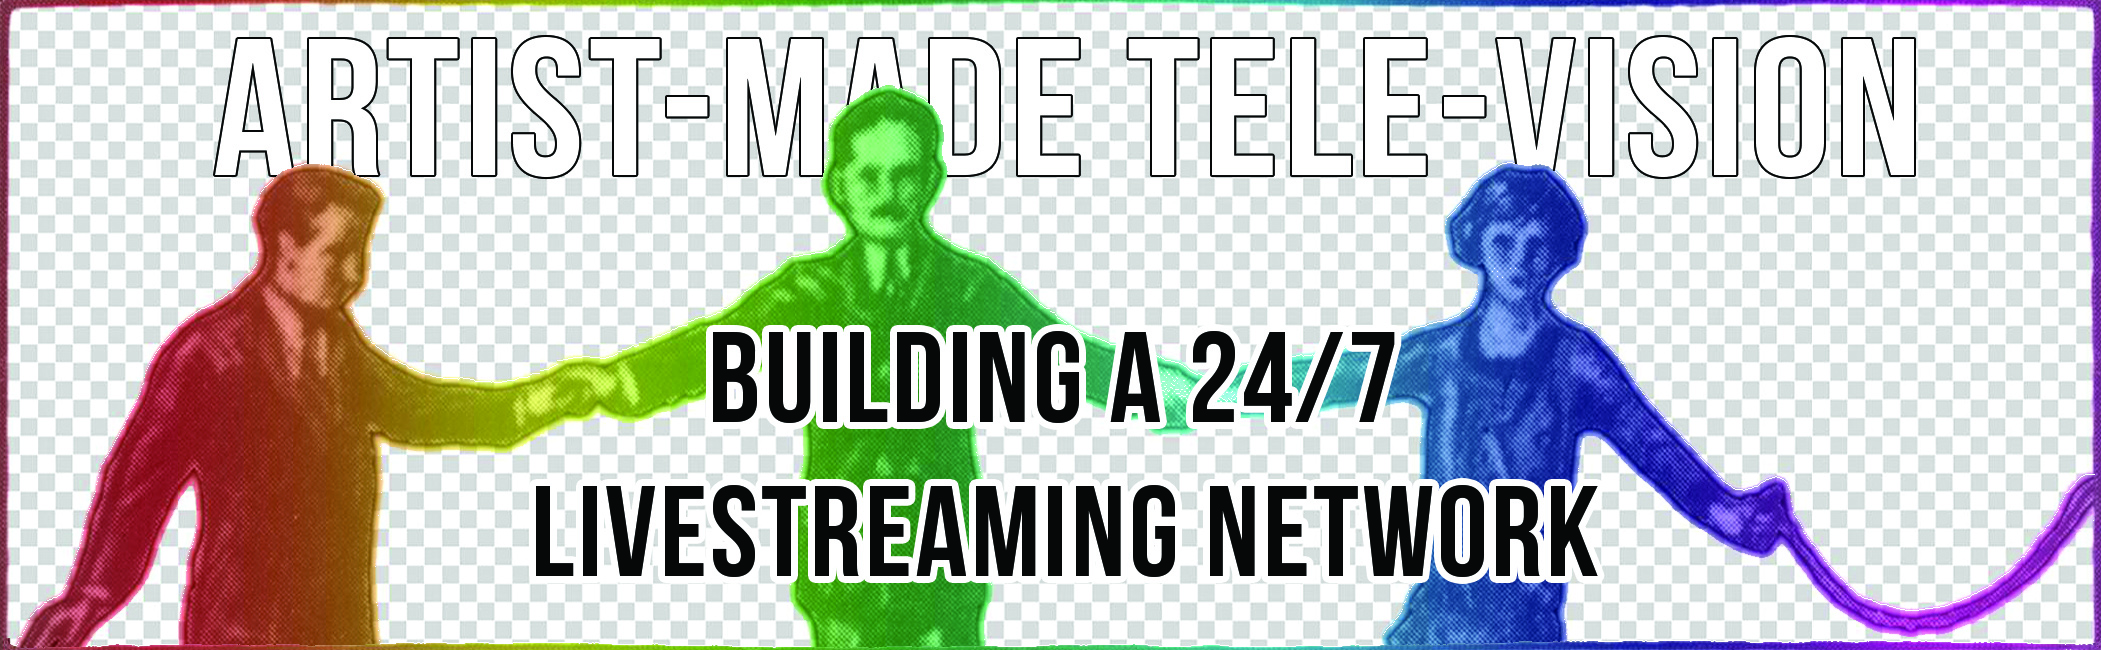 Building a 24/7 LIvestreaming Network